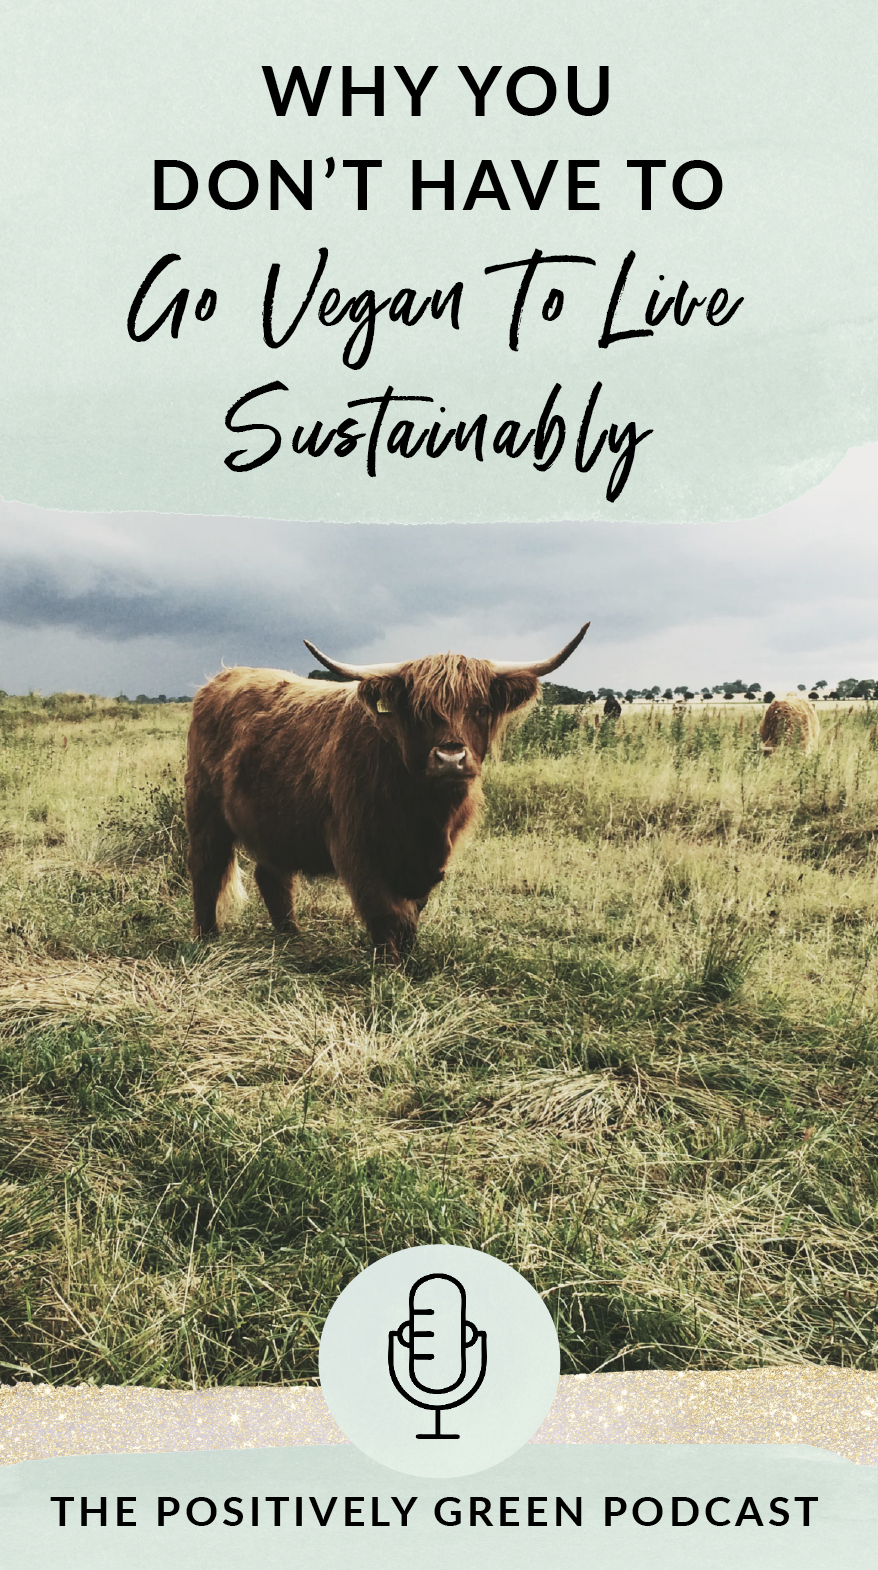 Why you don't have to go vegan to live sustainably - The Positively Green Podcast